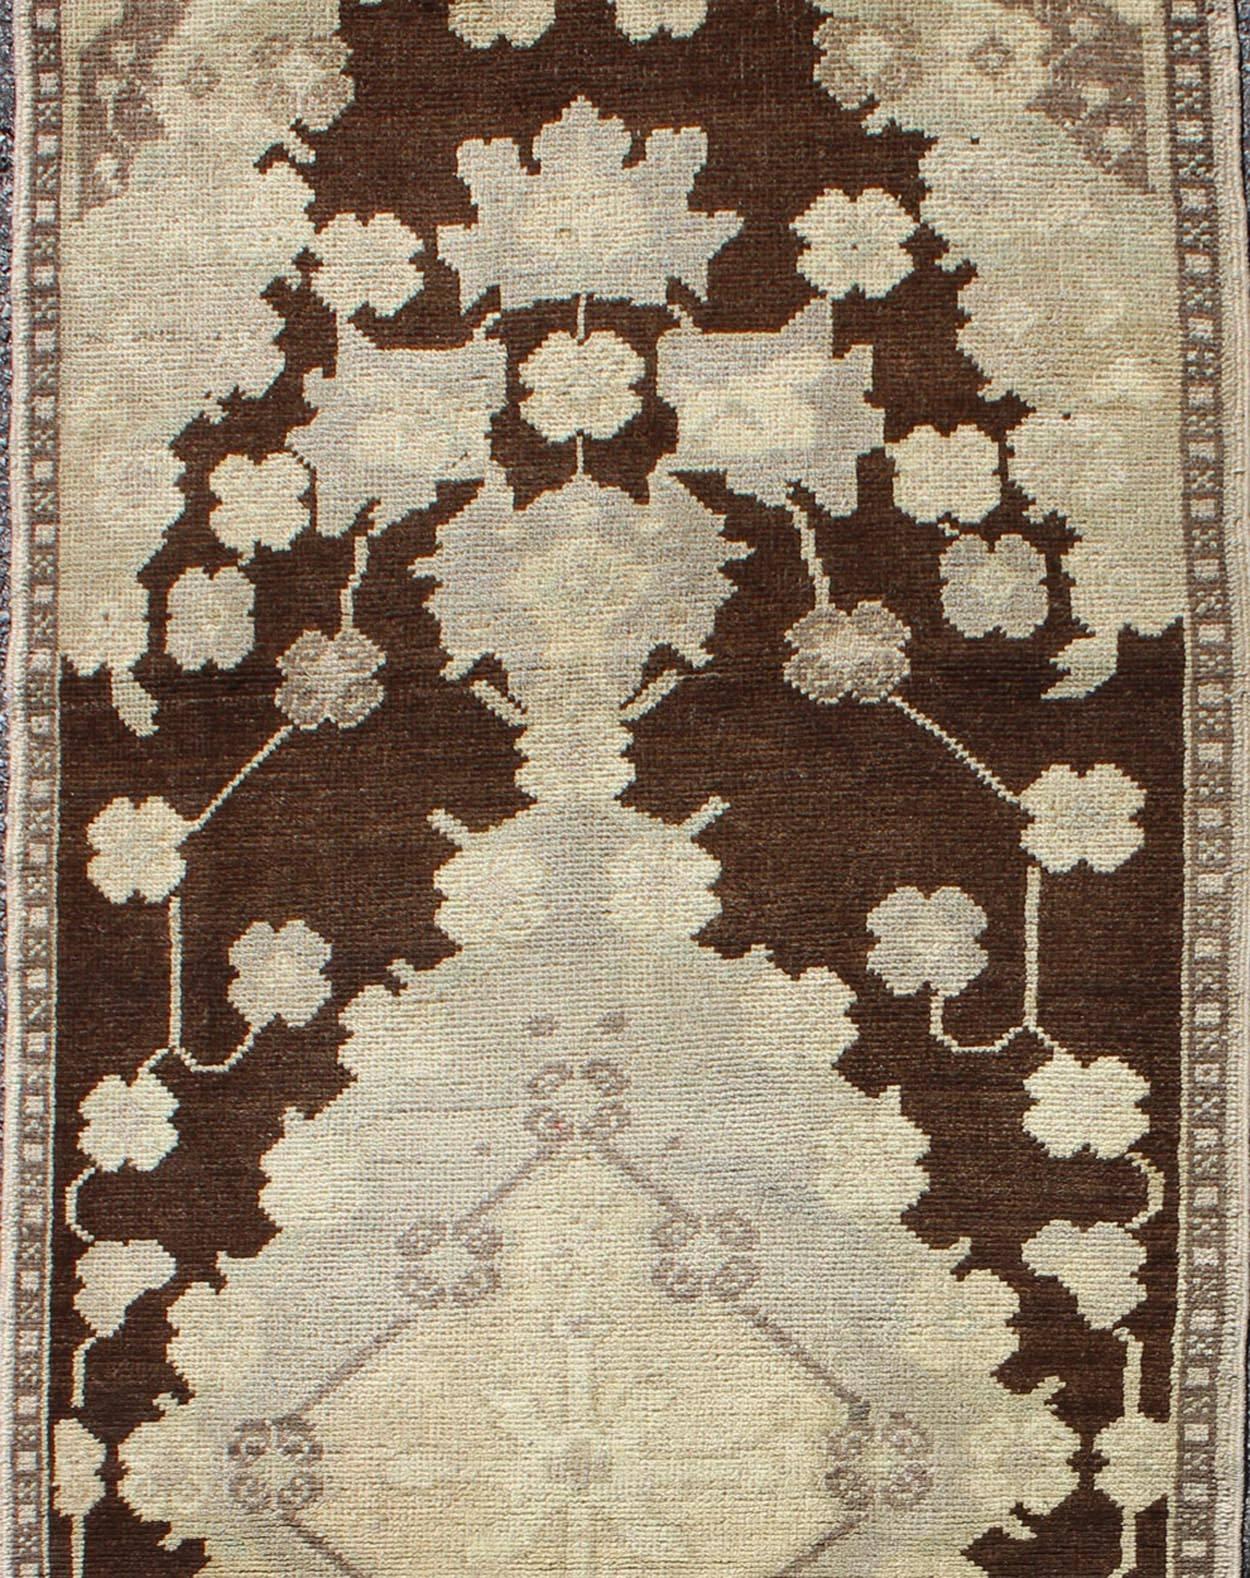 Floral Medallion Vintage Turkish Tulu Runner in Chocolate Brown, Ivory, Cream In Excellent Condition For Sale In Atlanta, GA